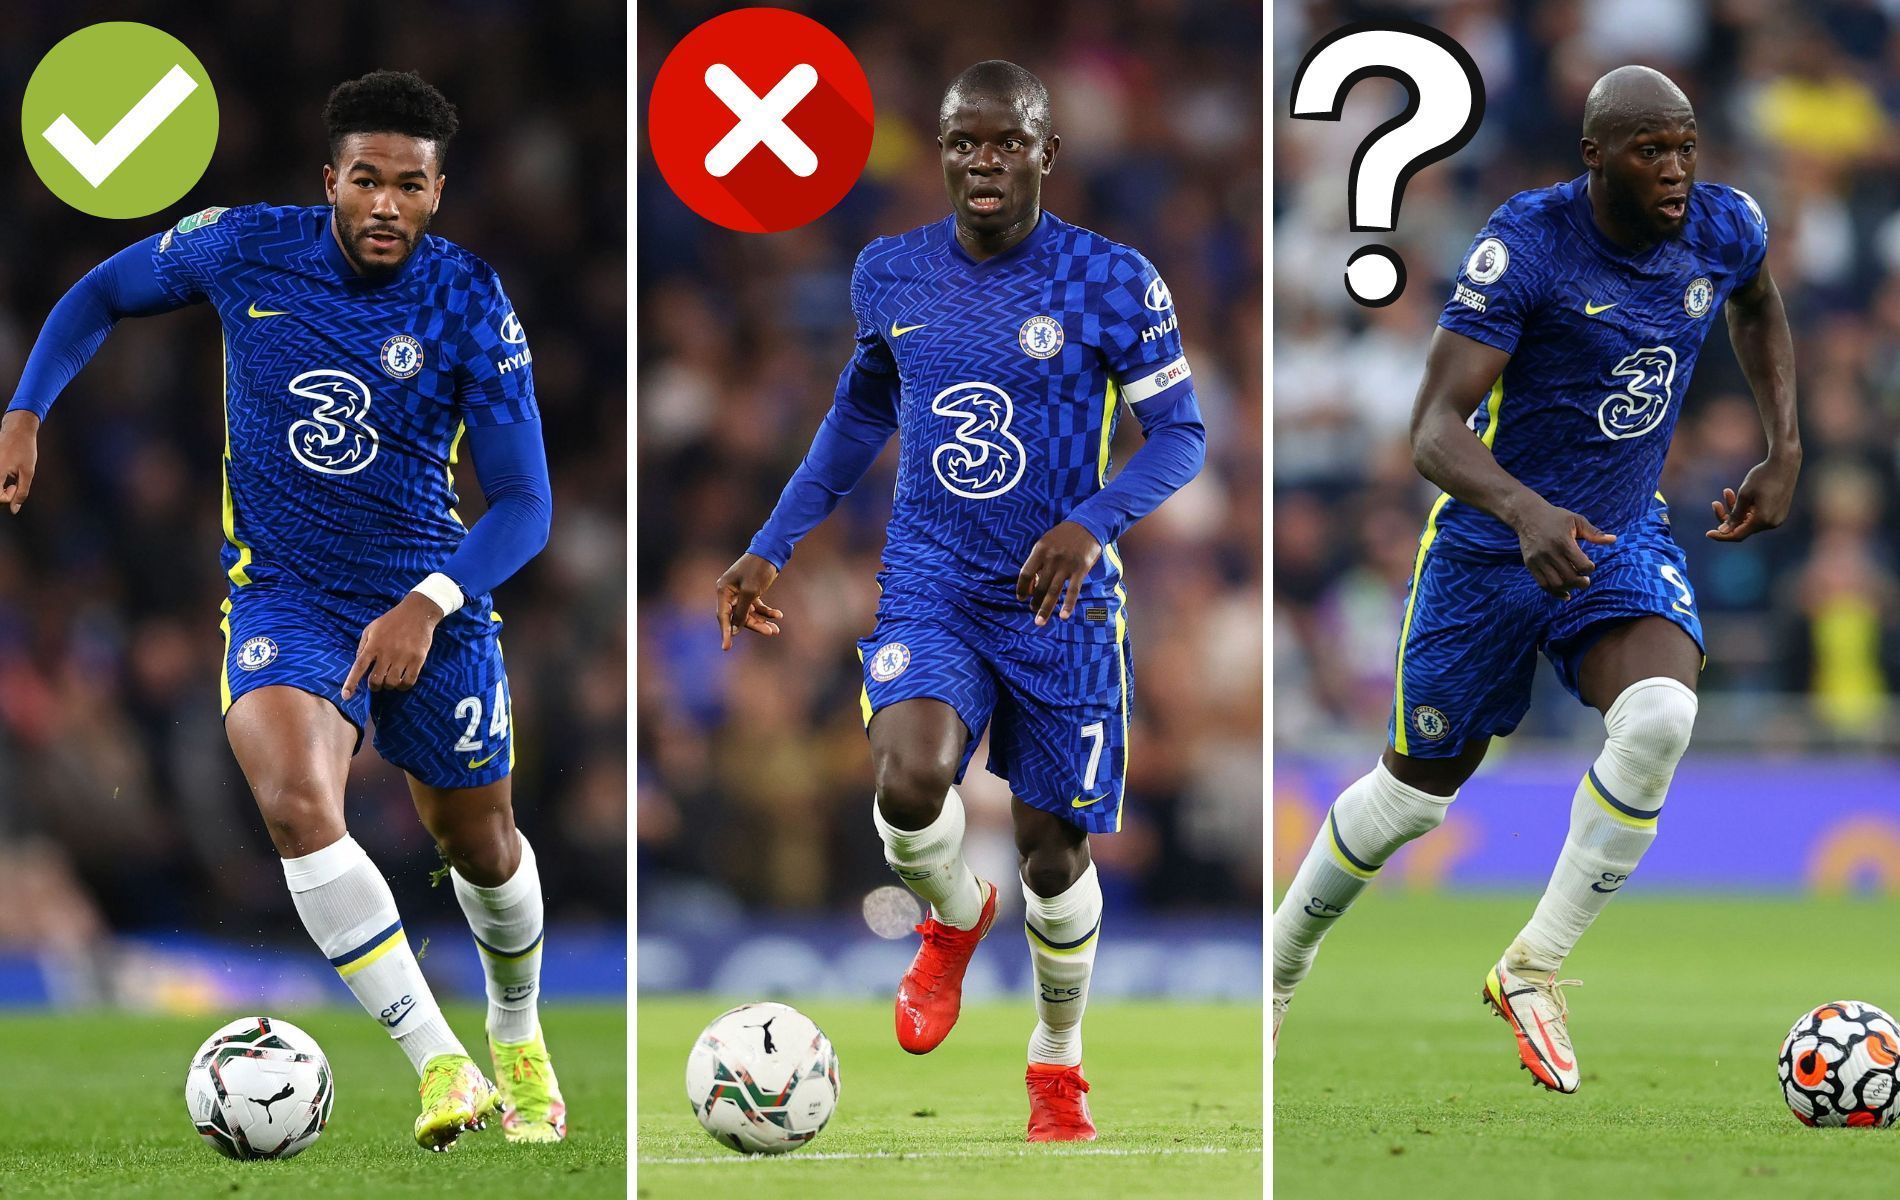 Who will make the starting XI for Chelsea on Sunday?